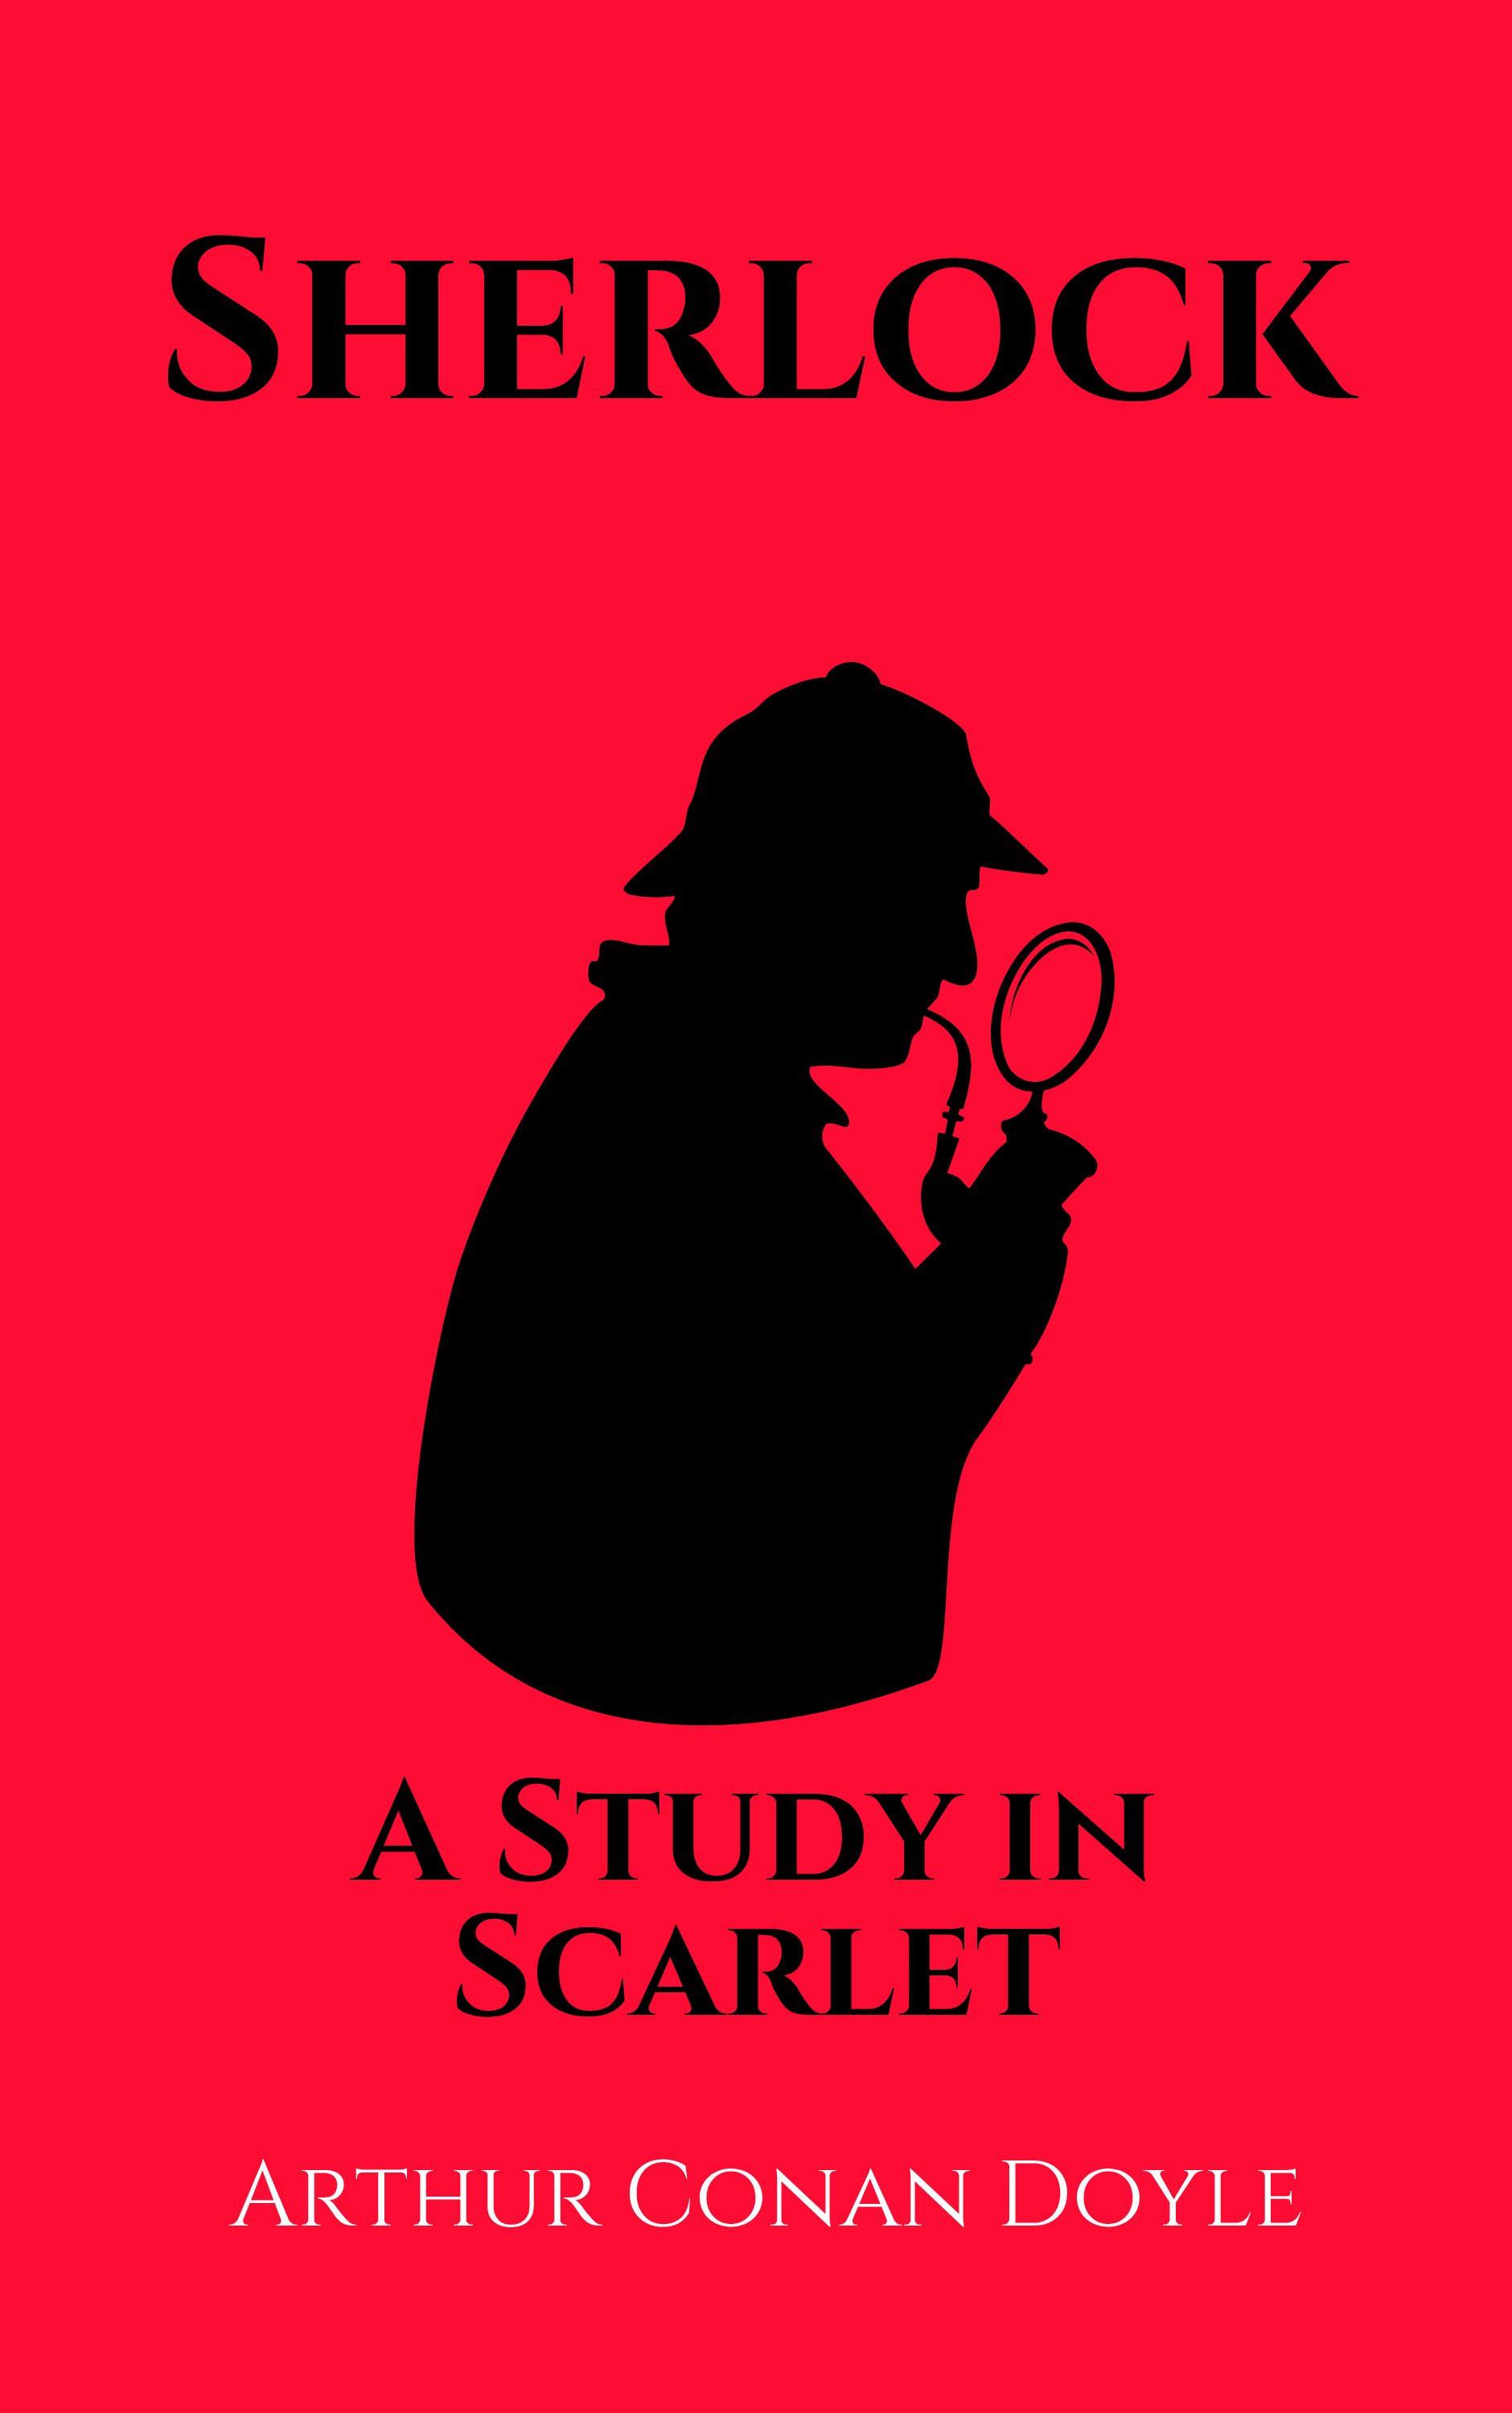 Book Cover: A Study in Scarlet